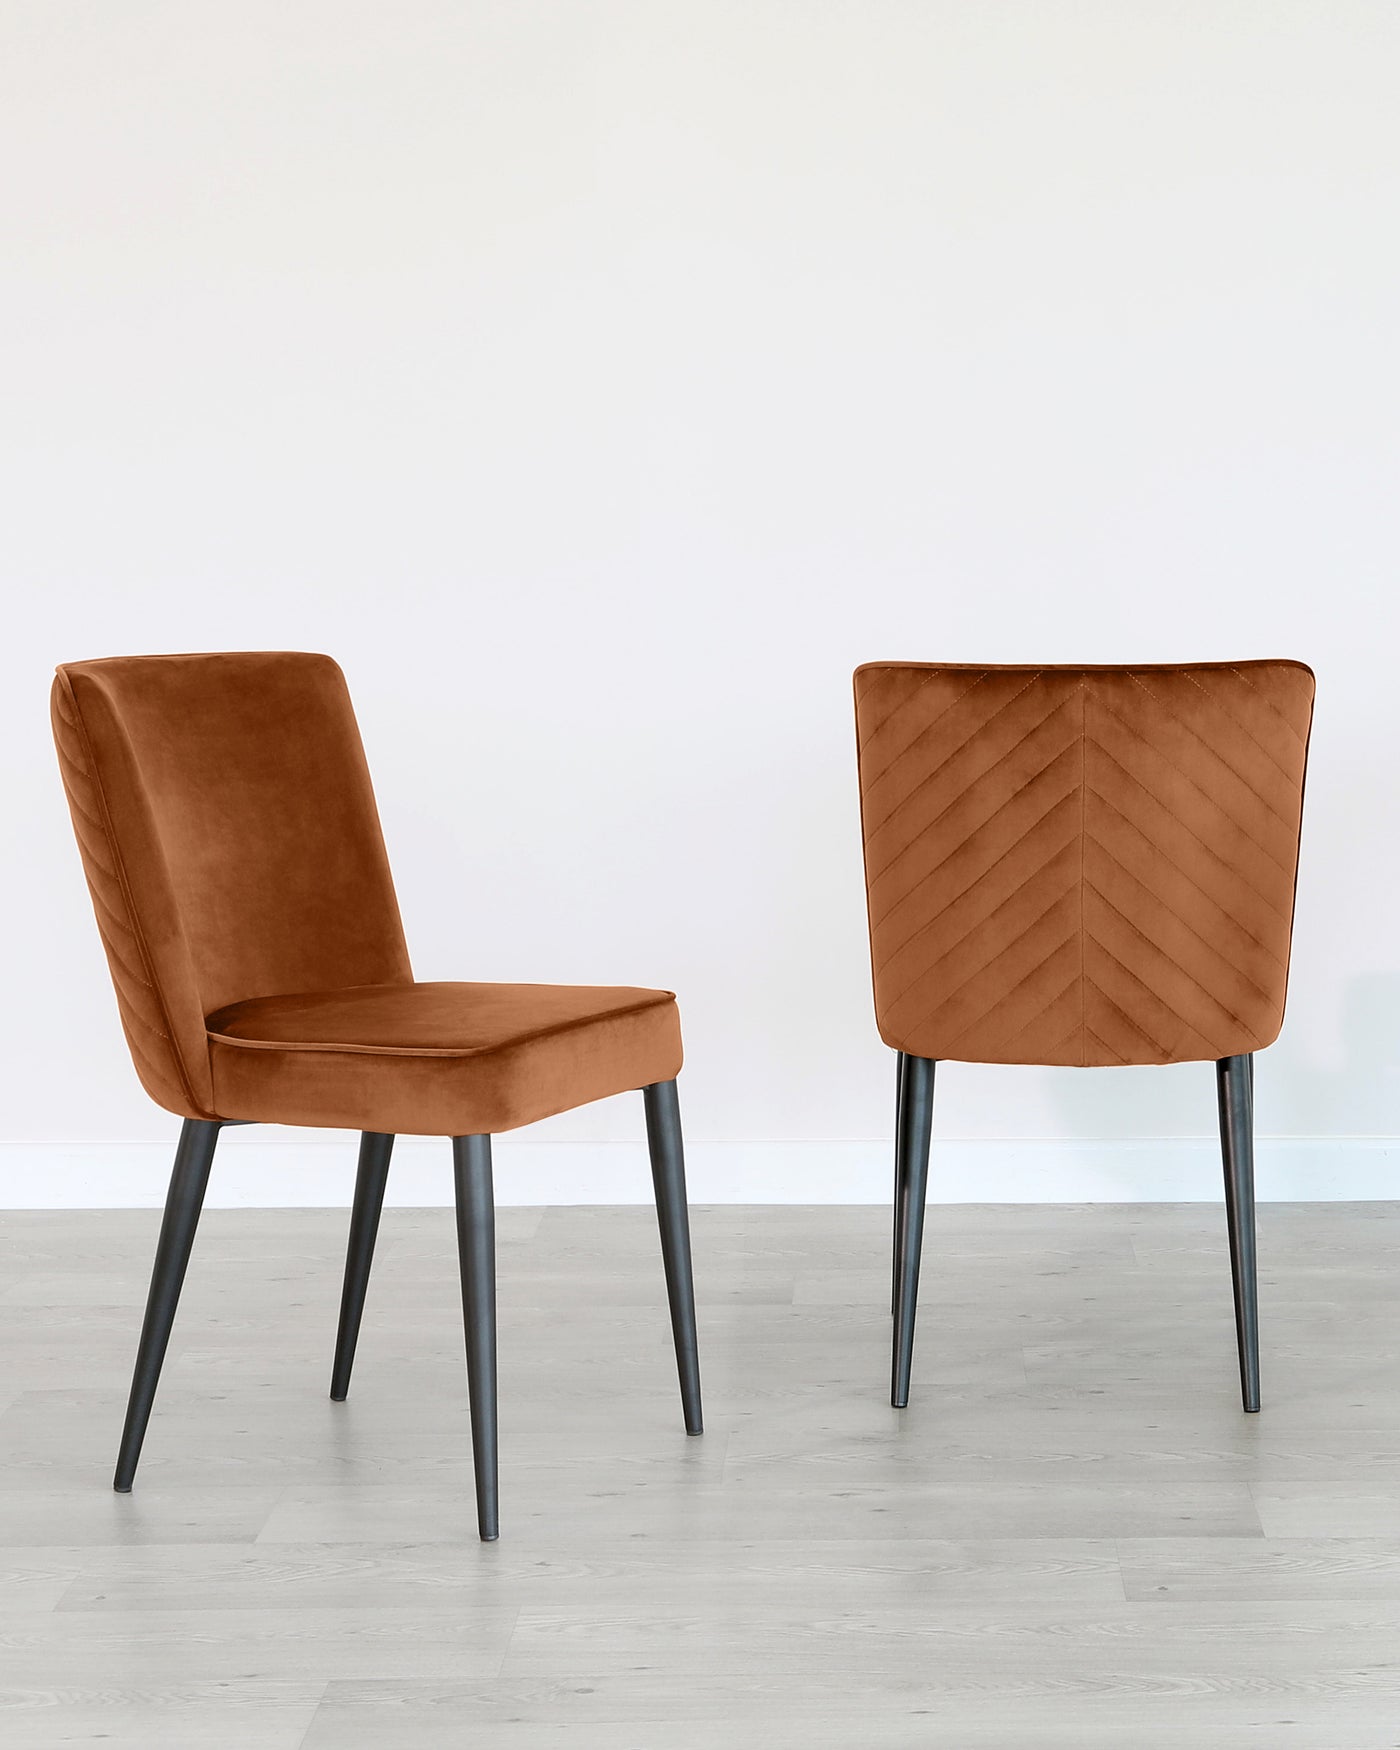 Two modern dining chairs with a sleek design, featuring caramel-coloured upholstery and dark grey metal legs. The chair in the foreground is shown from the front, while the other is viewed from the back, displaying a distinctive chevron stitching pattern.